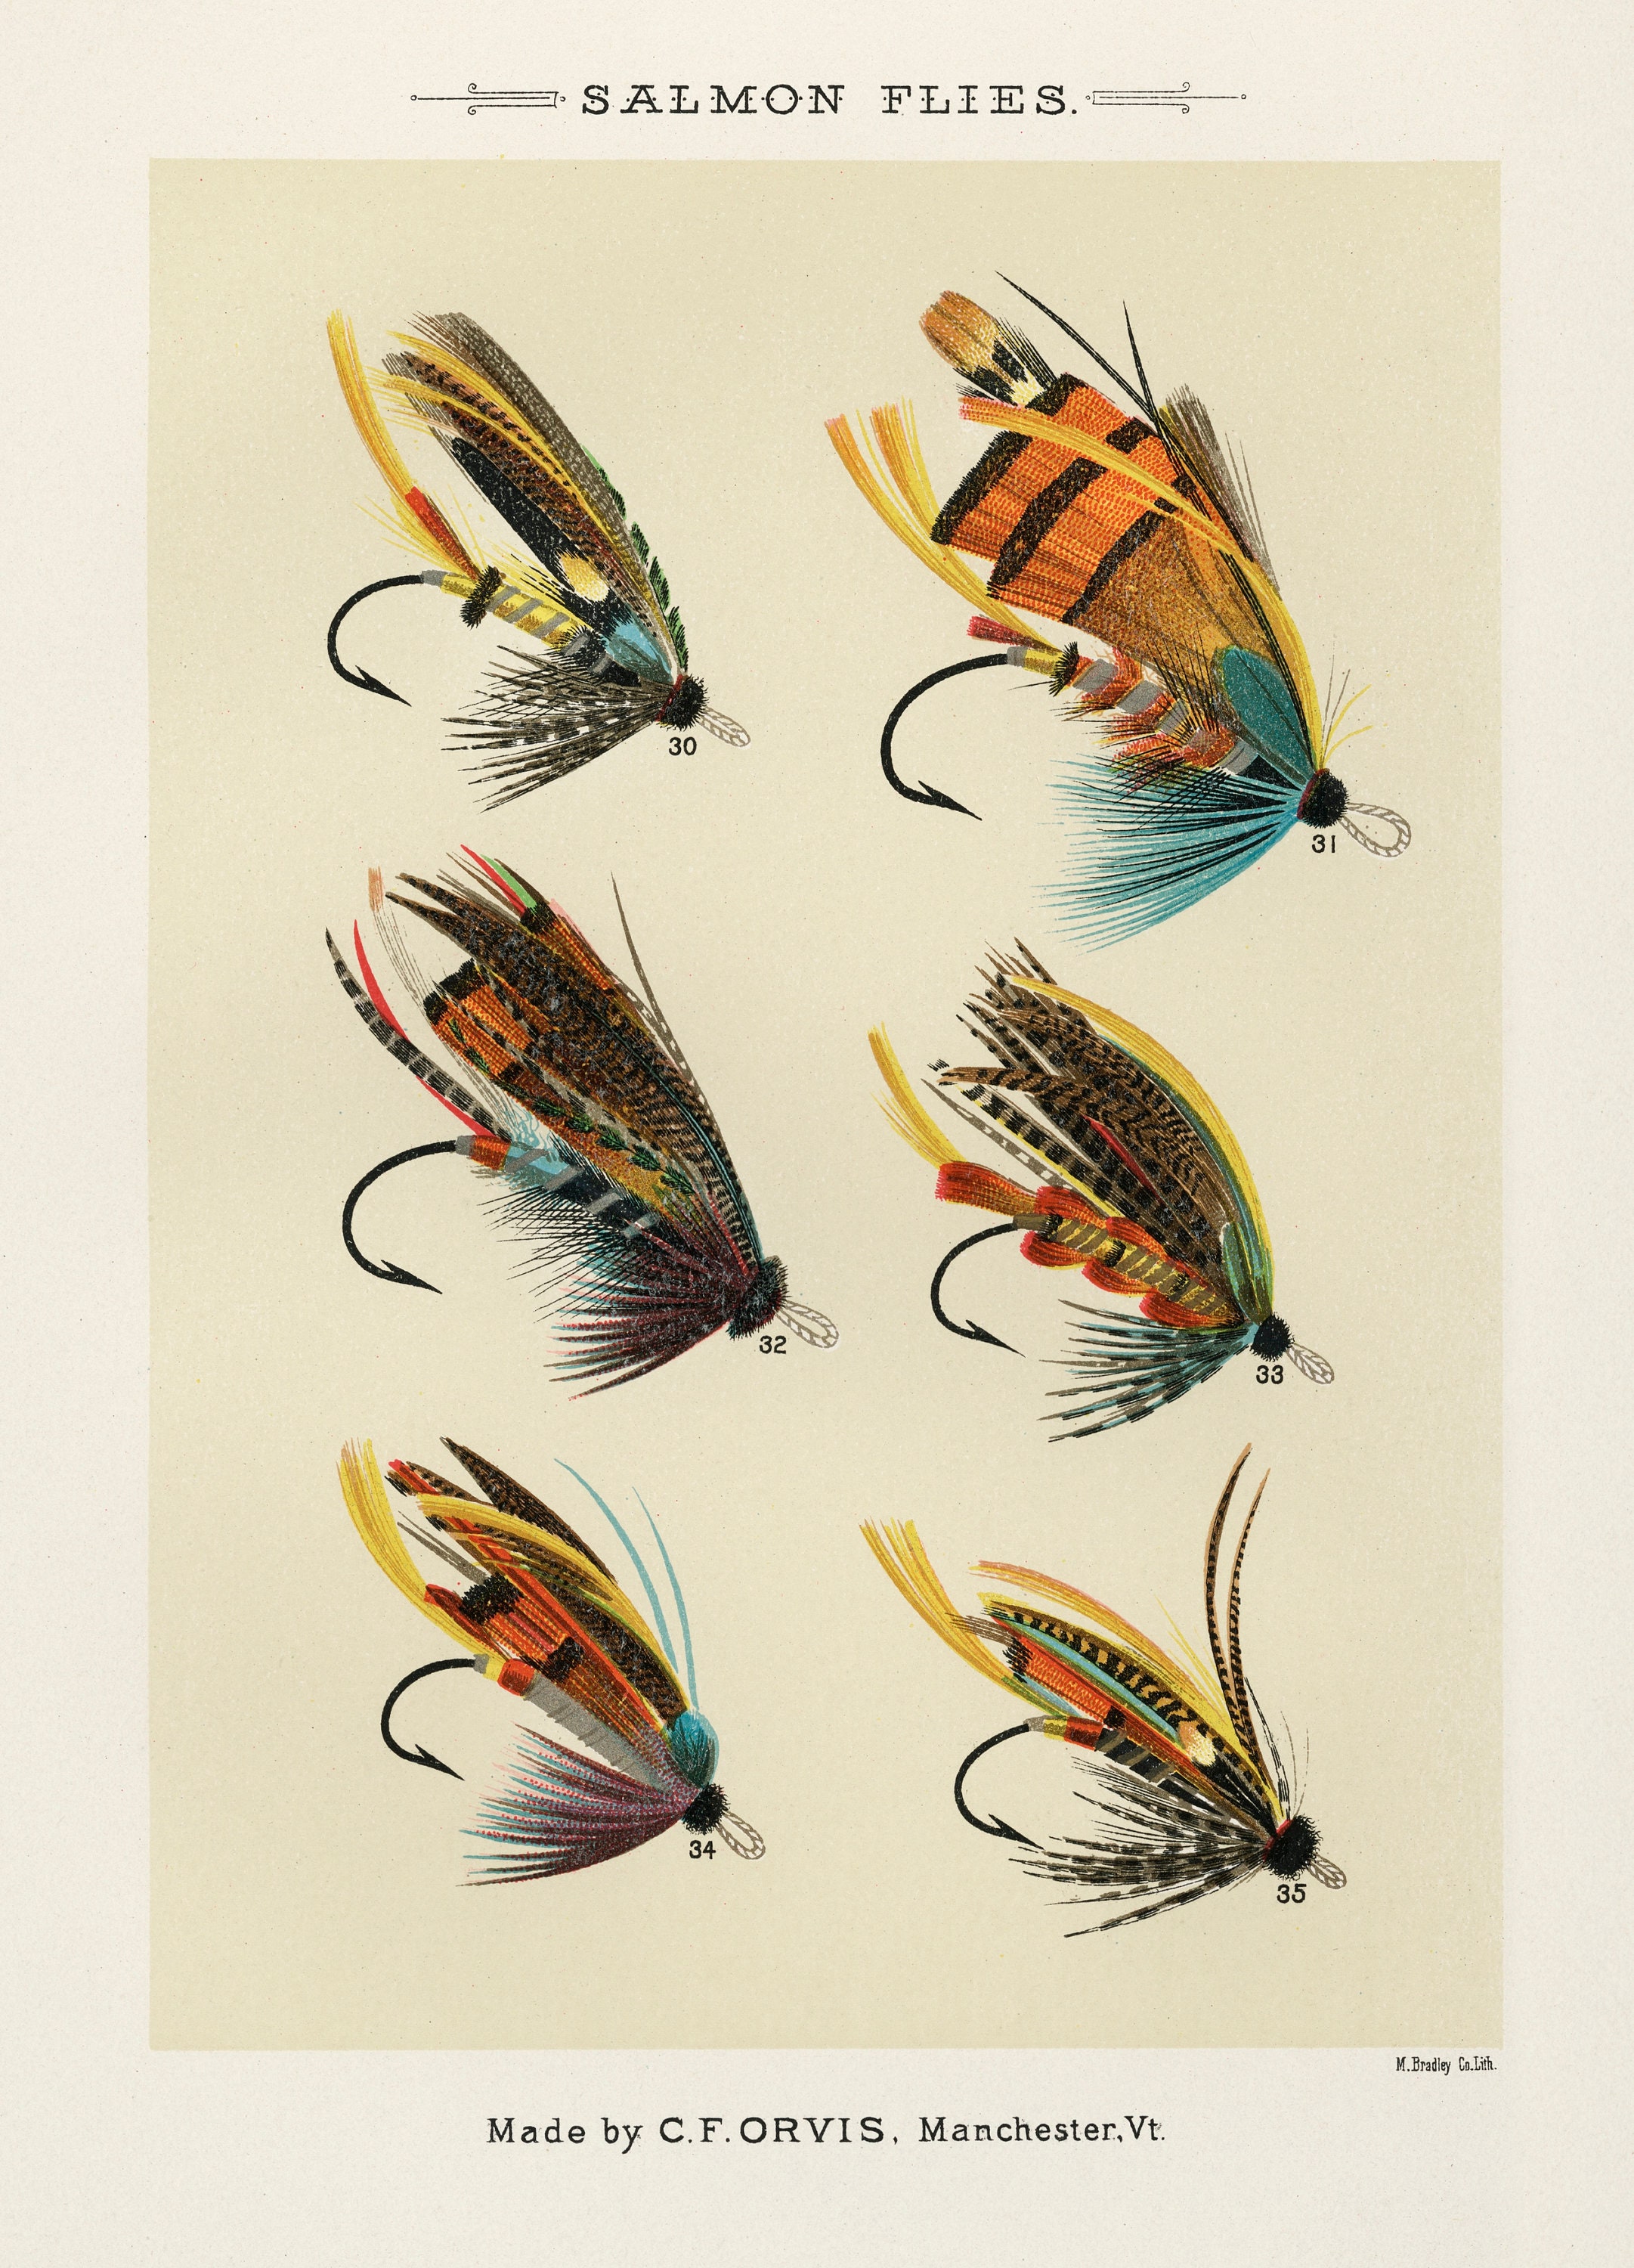 Mary Orvis Salmon Flies 3 Single Printable Wall Art Large High Quality  Vintage Fly Fishing Dry Flies Commercial Use Digital Download 